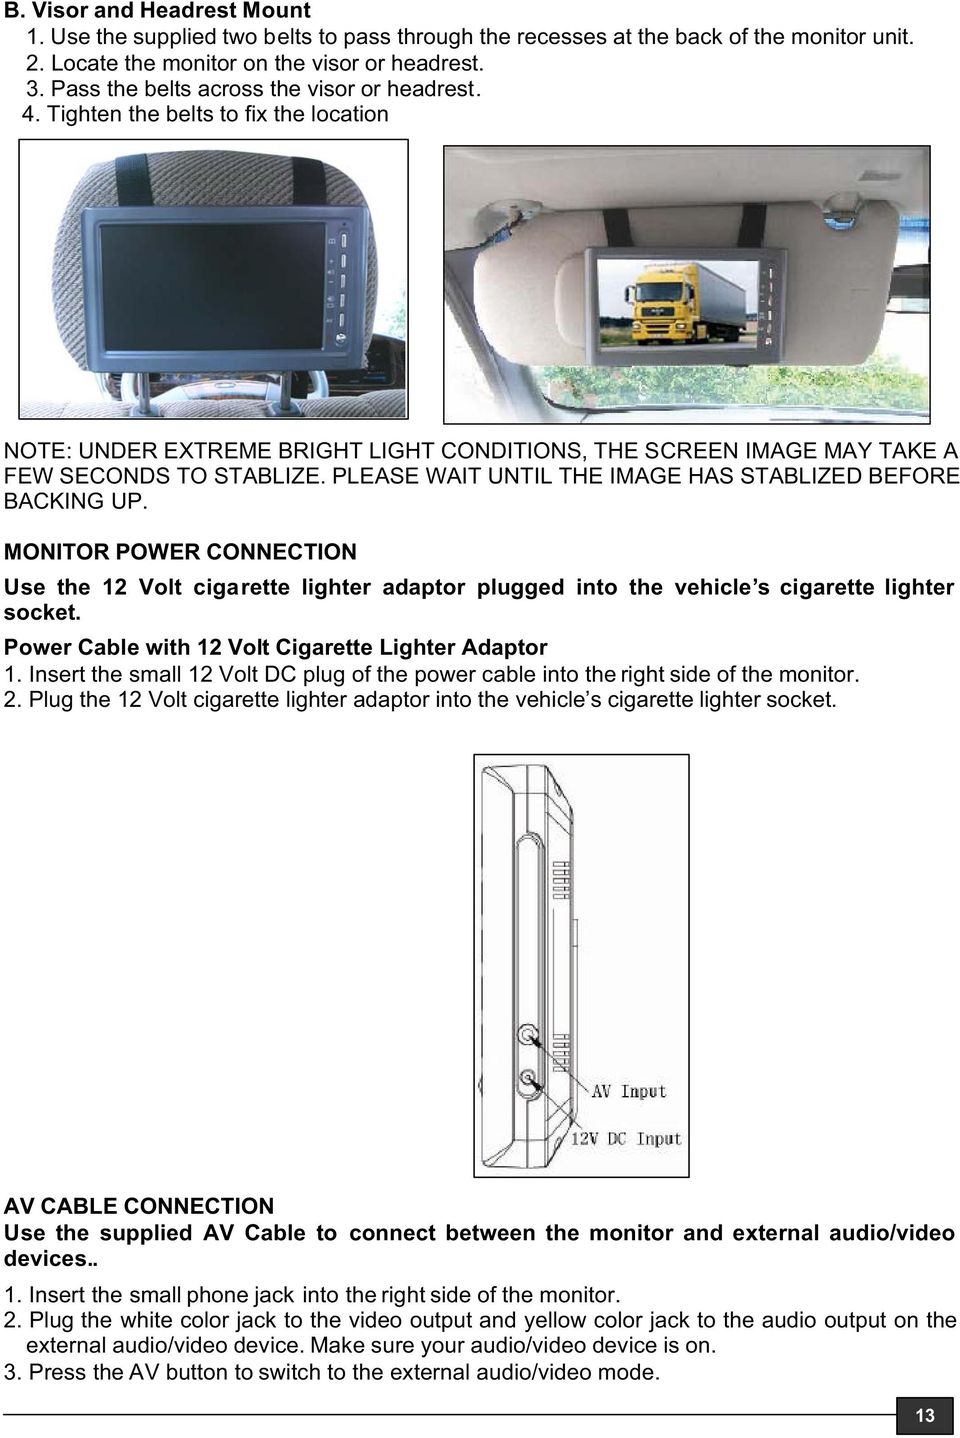 PLEASE WAIT UNTIL THE IMAGE HAS STABLIZED BEFORE BACKING UP. MONITOR POWER CONNECTION Use the 12 Volt cigarette lighter adaptor plugged into the vehicle s cigarette lighter socket.